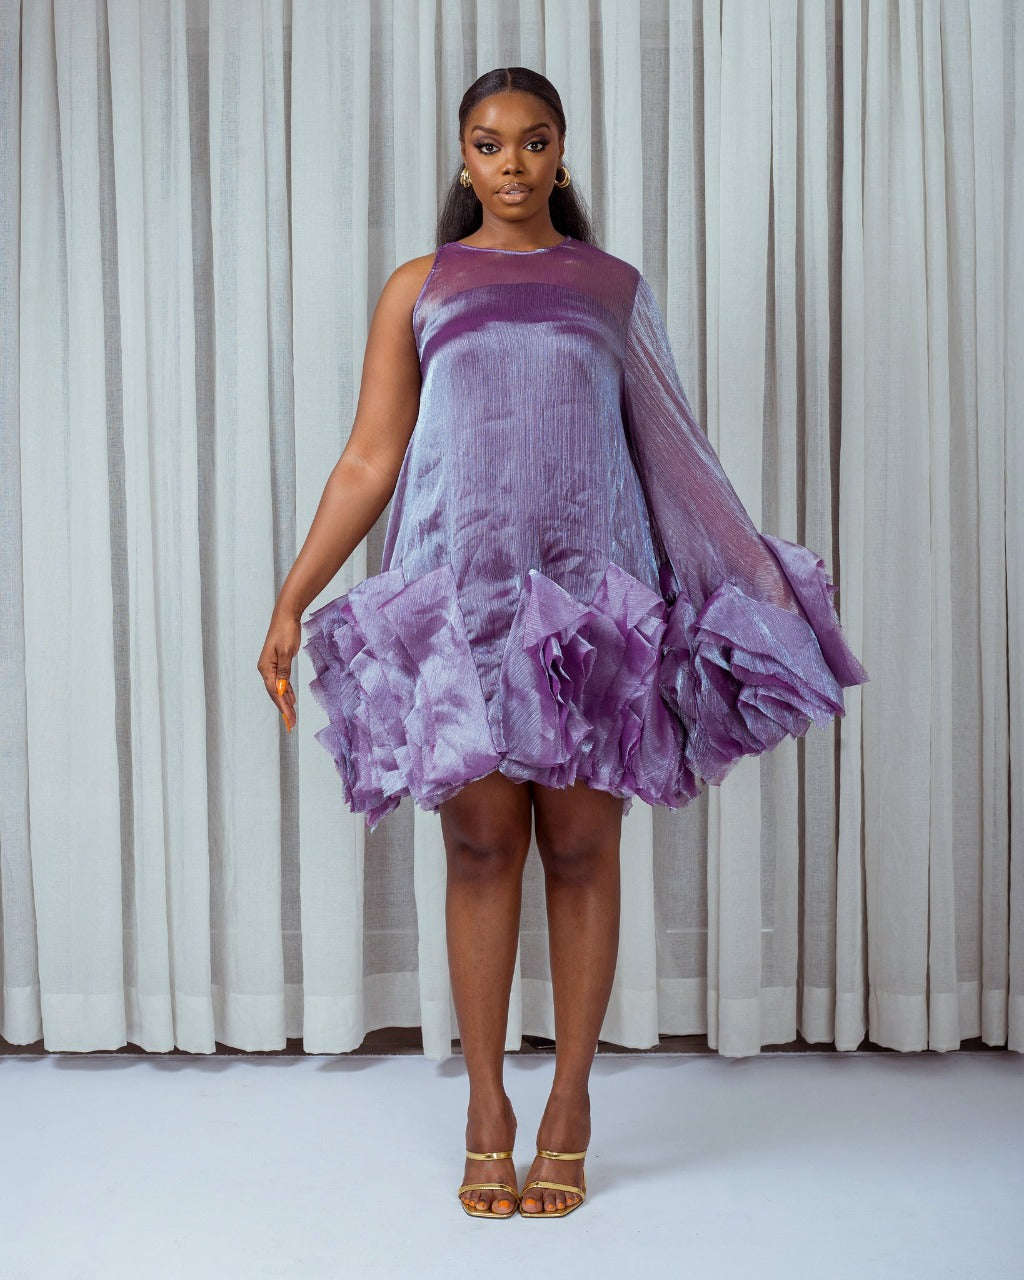 A model wearing a Purple asymetric sleeve mini dress with ruffles and silk slip lining in front of white curtains